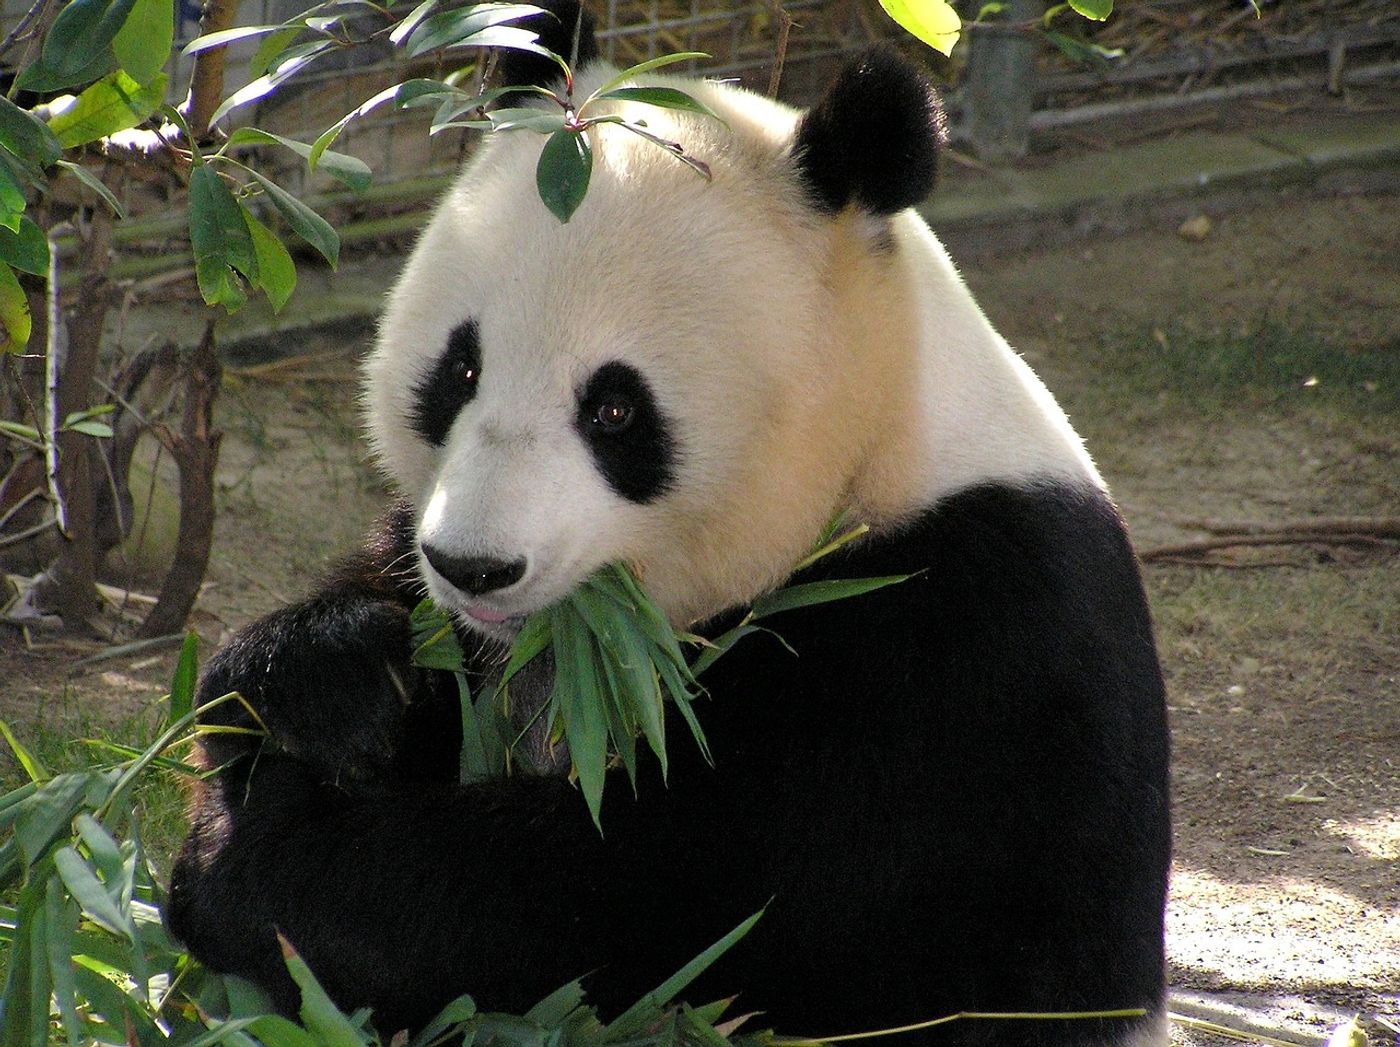 Giant Pandas may not be "endangered" anymore, but their populations are being fragmented by land development in China.